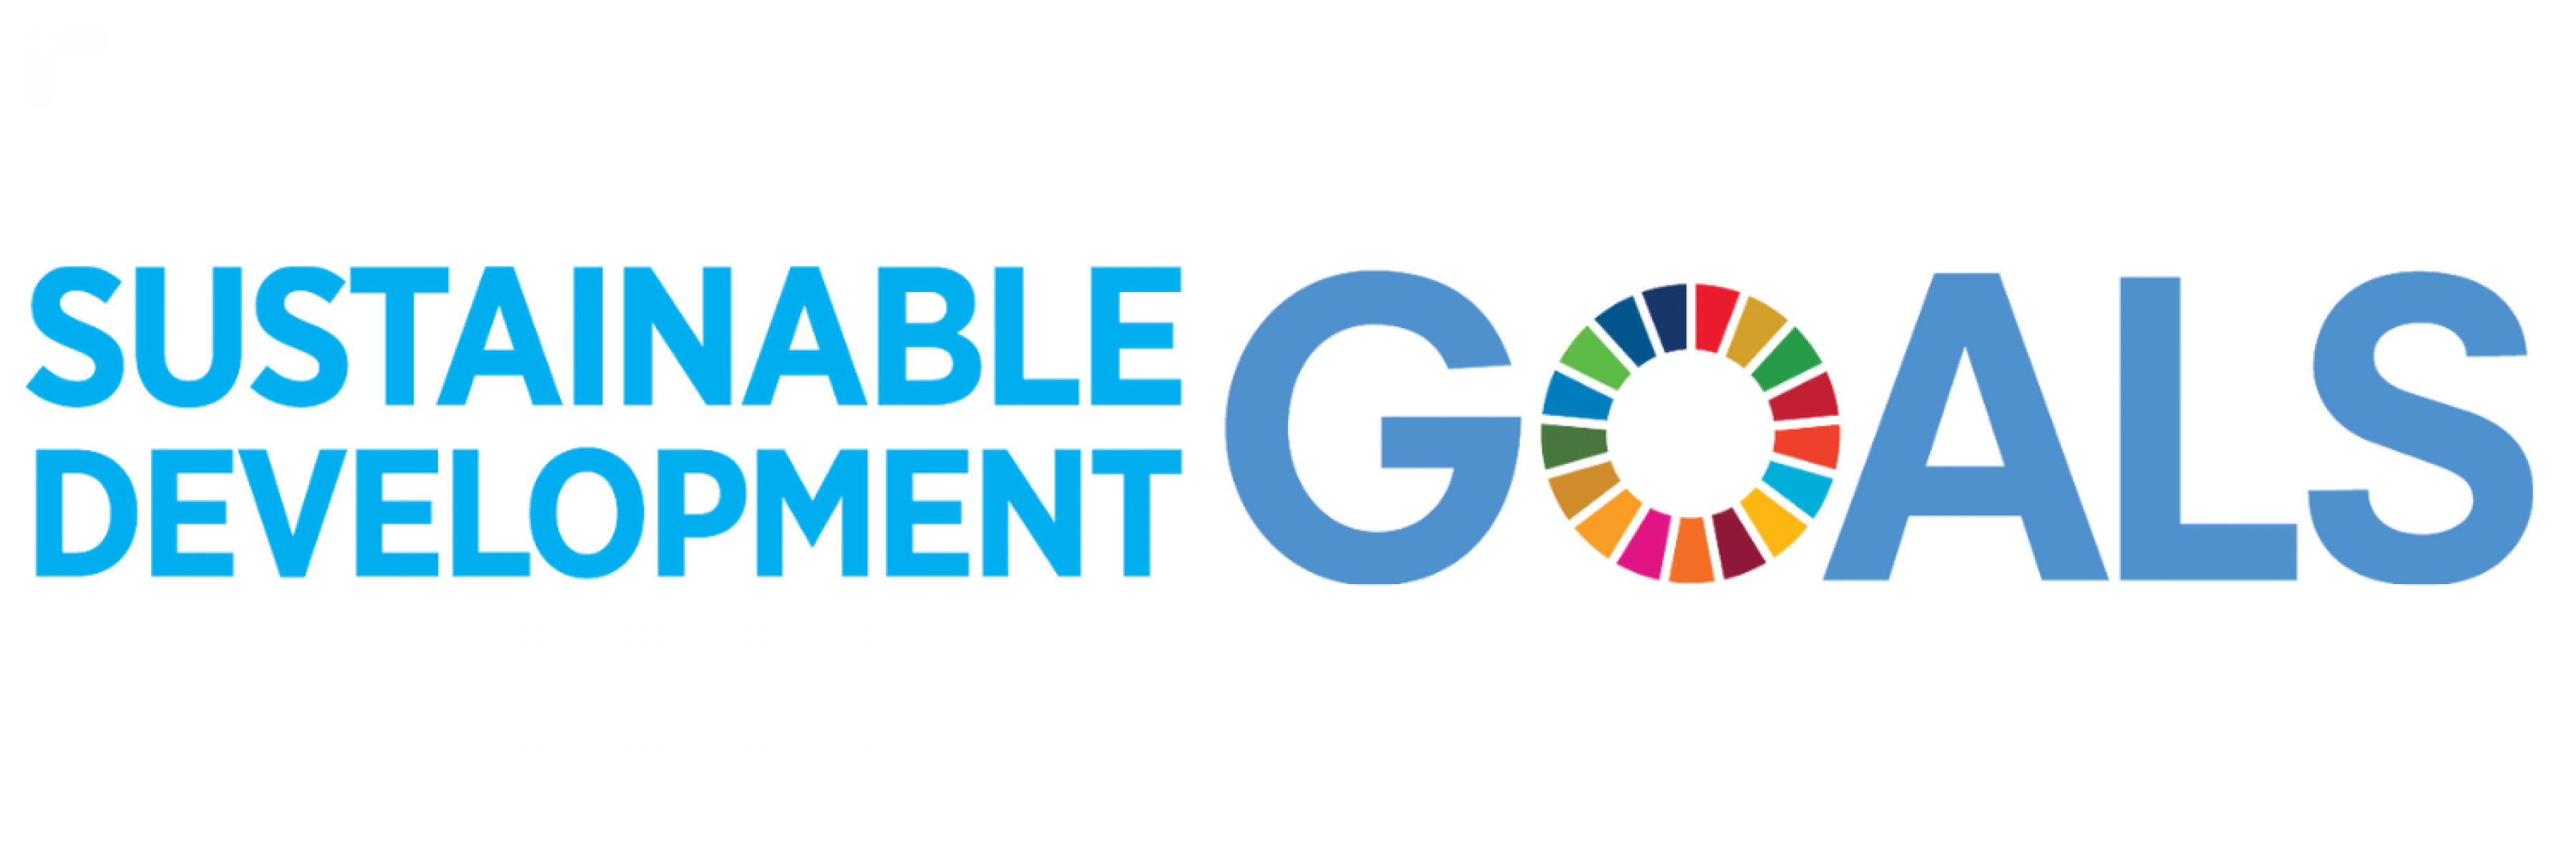 Blue text on a white background that reads Sustainable Development Goals. The O of the word goals is a colourful segmented circle that represents the different goals.